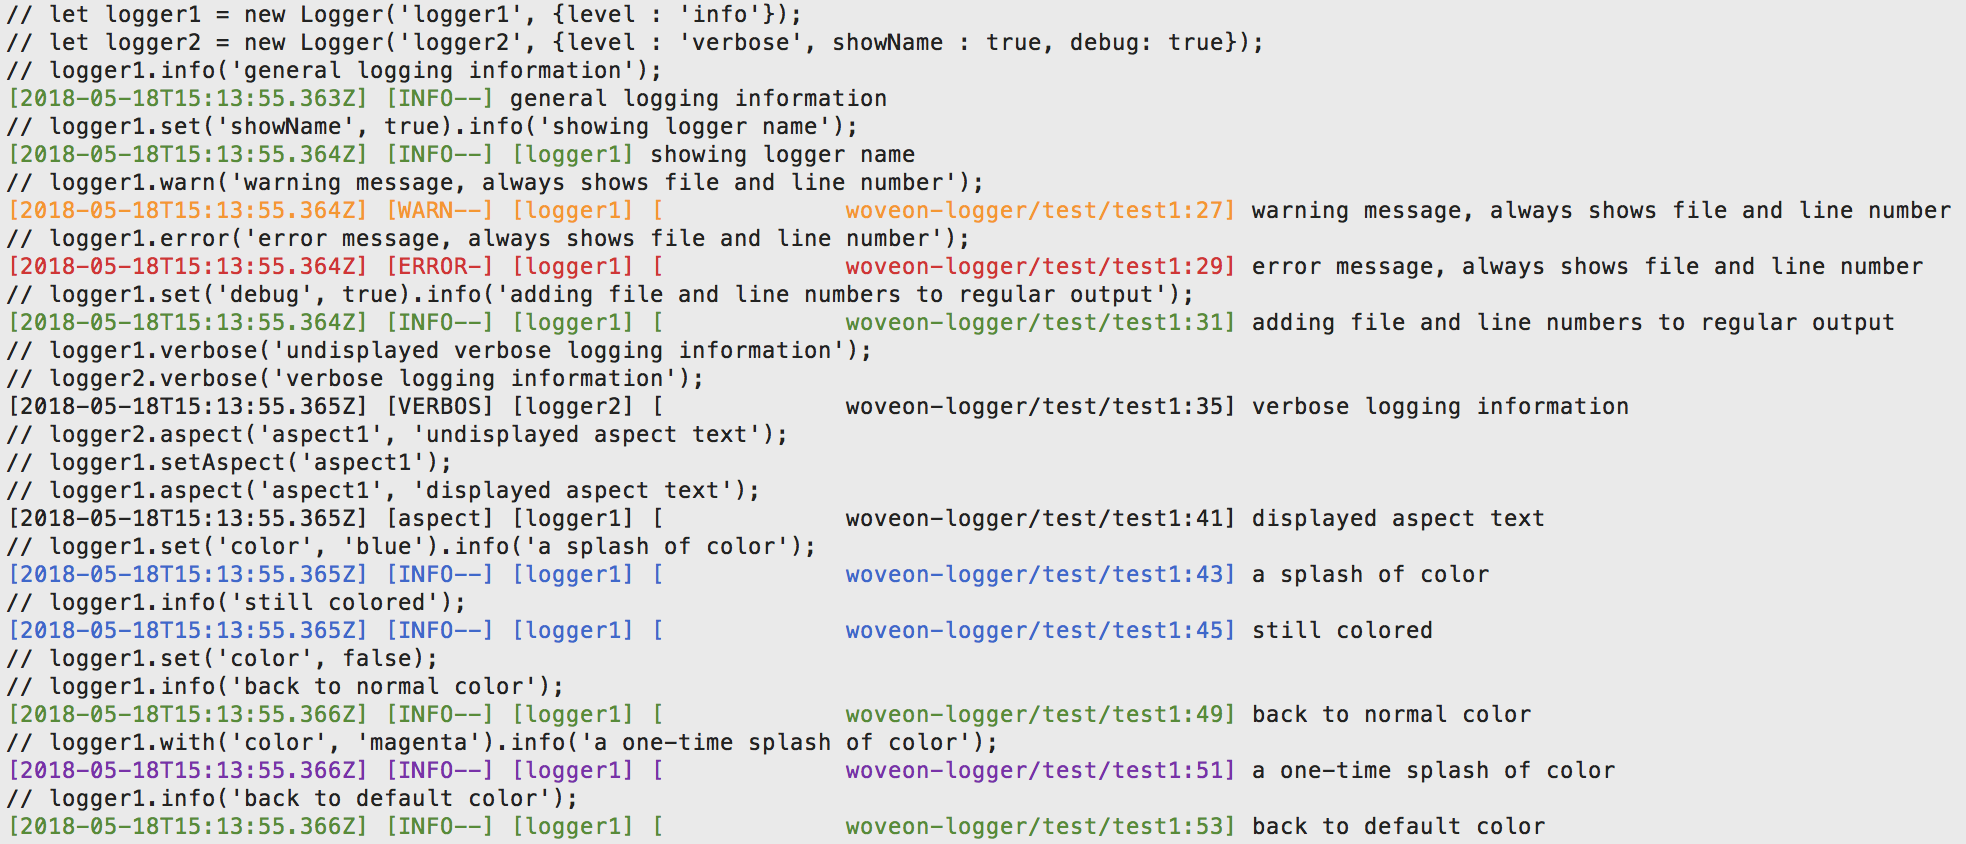 Sample logger output (from mocha test)